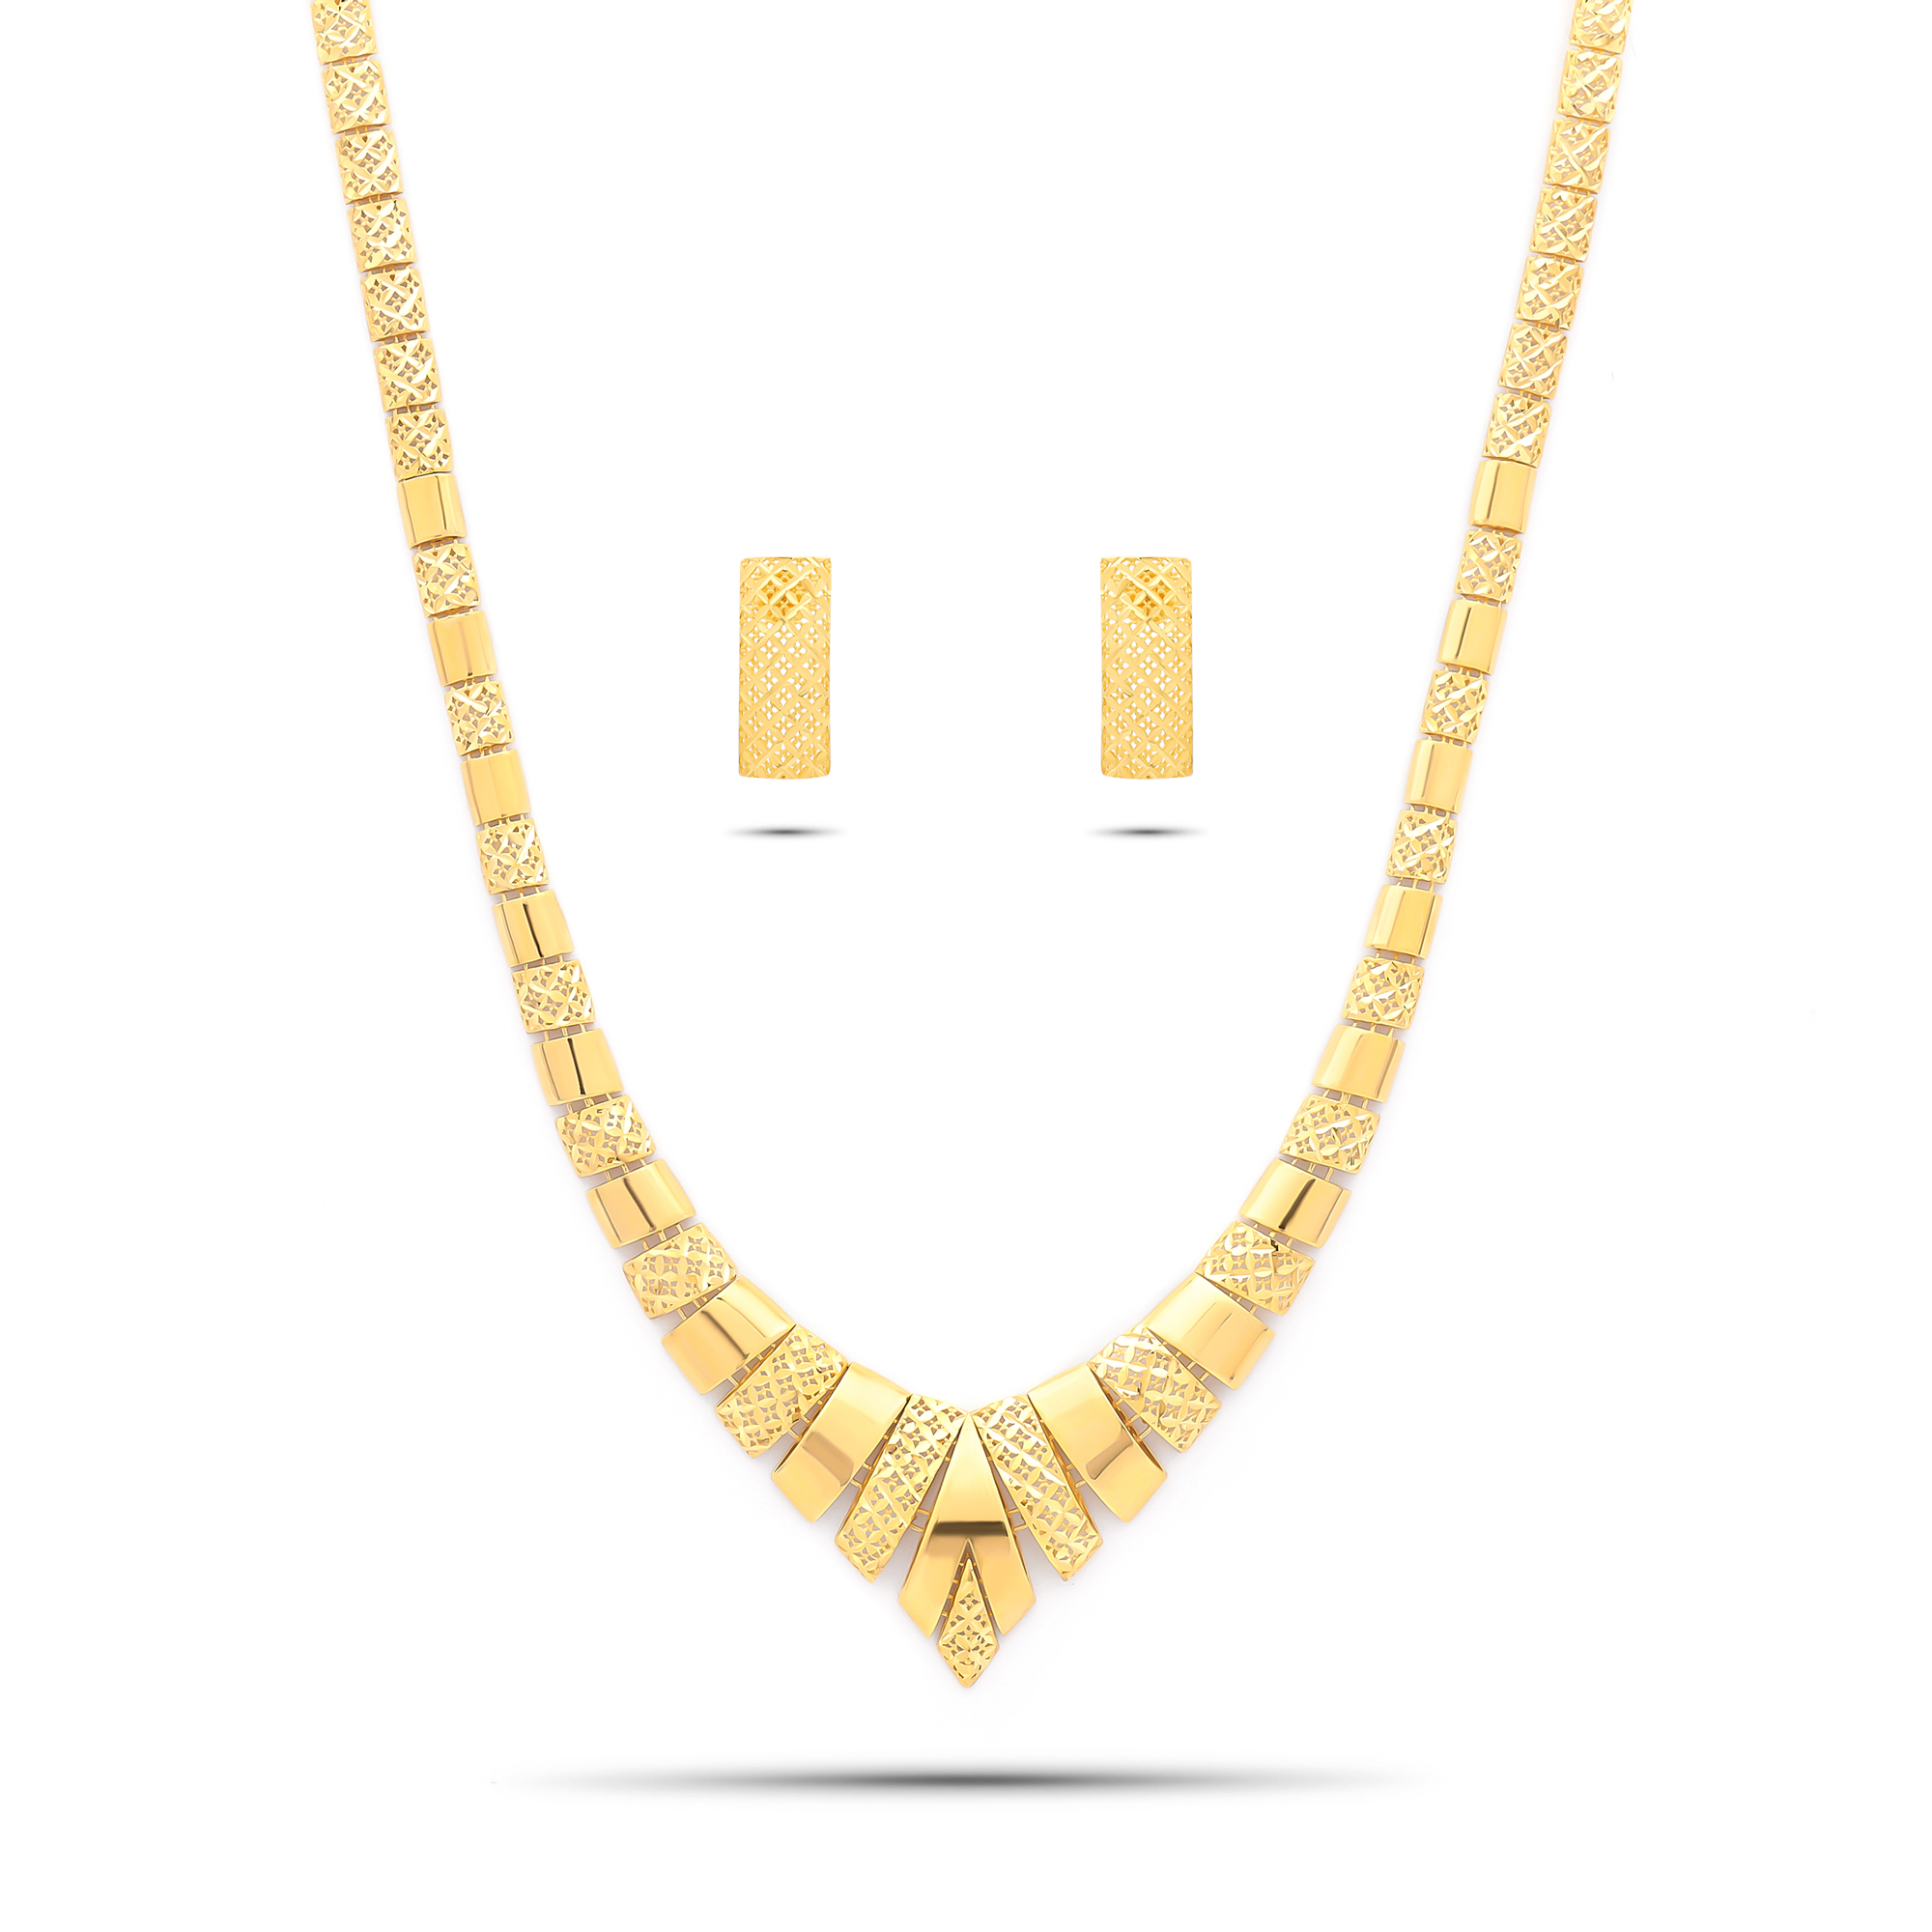 Queen of Hearts Jewelry 22K Gold Turkish Mesh Necklace Set (21.10G)